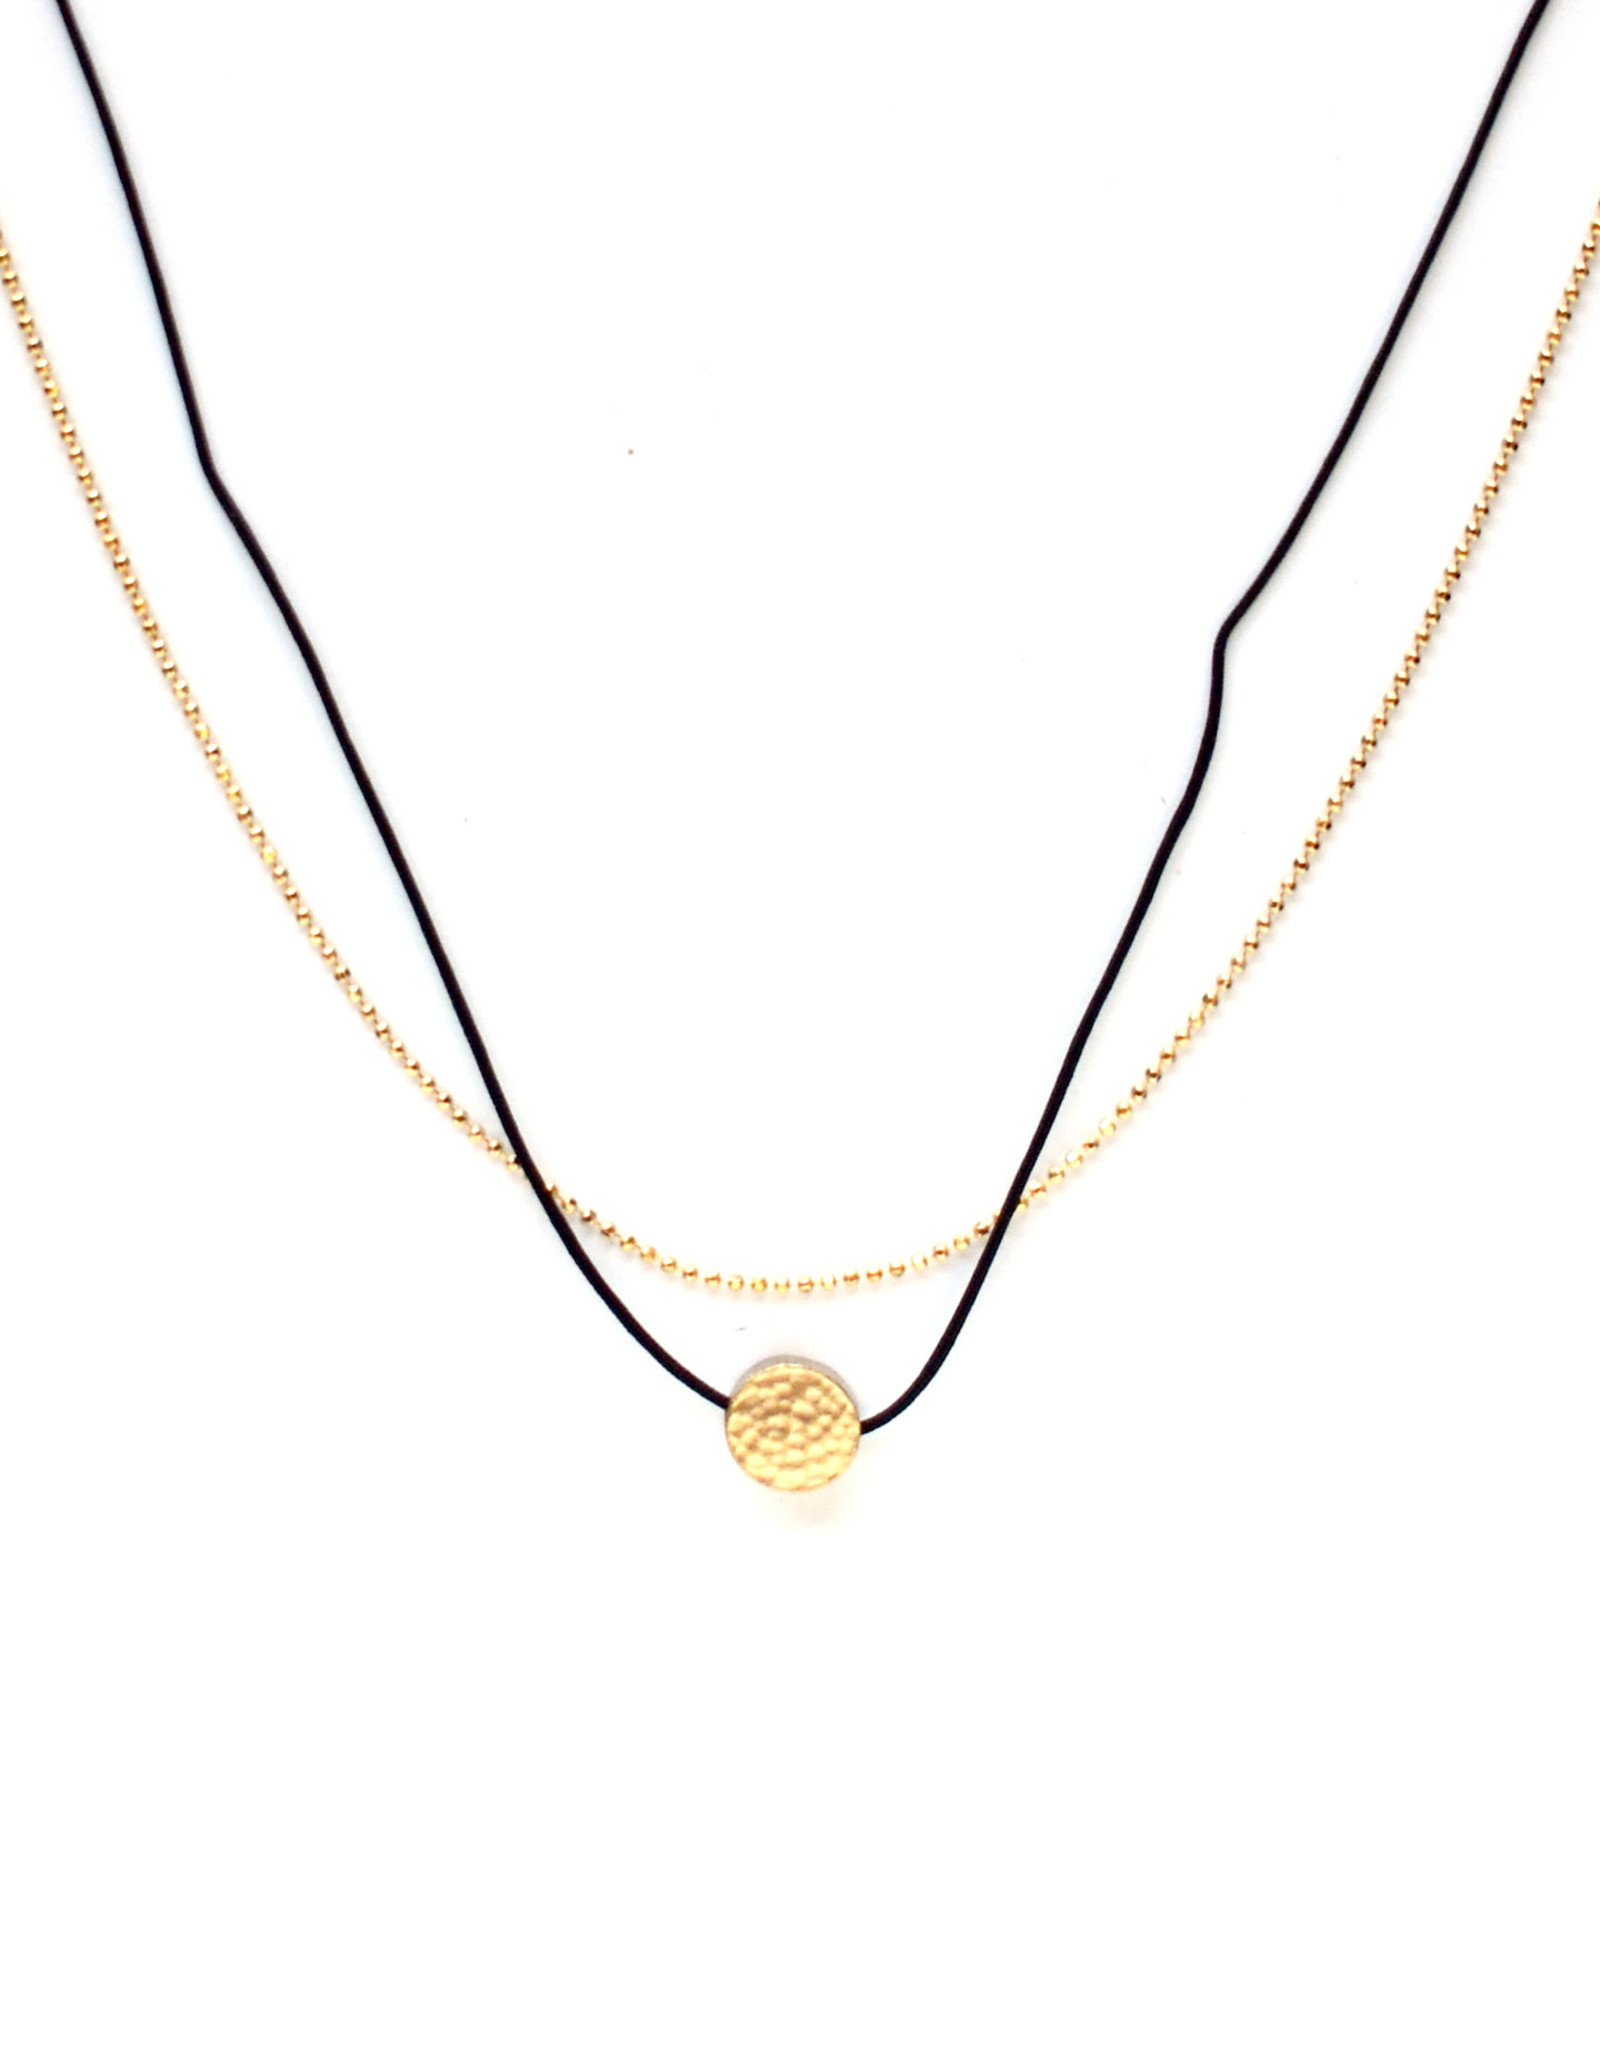 Layered Hammered Circle Necklace - Gold/Black